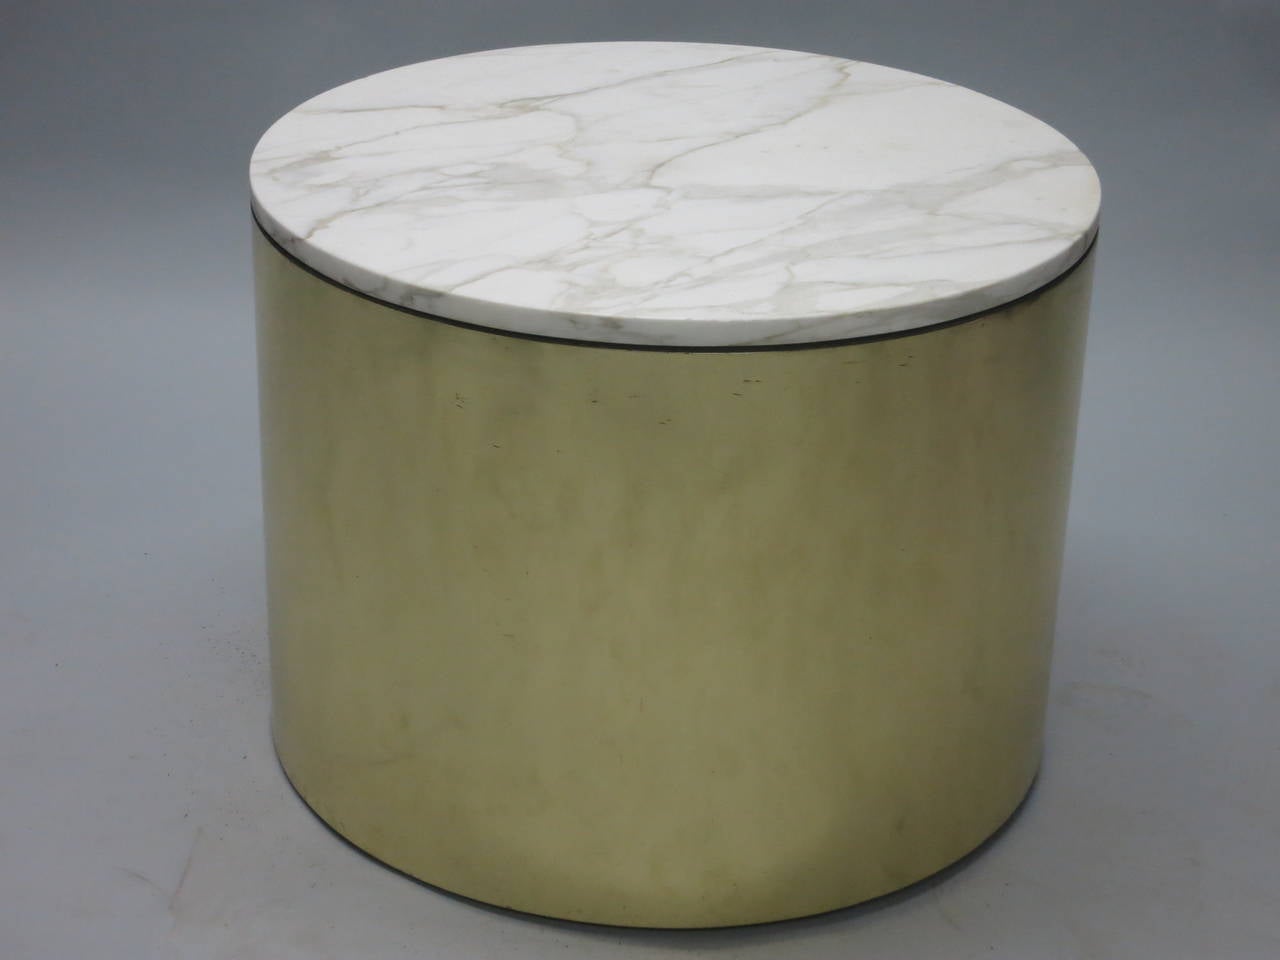 Two round side or coffee tables with brass frames and 3/4 inch Italian white and grey marble tops. The tables are elevated with adjustable feet are both in original and very good condition with some minor surface marks on the brass. No chips on the